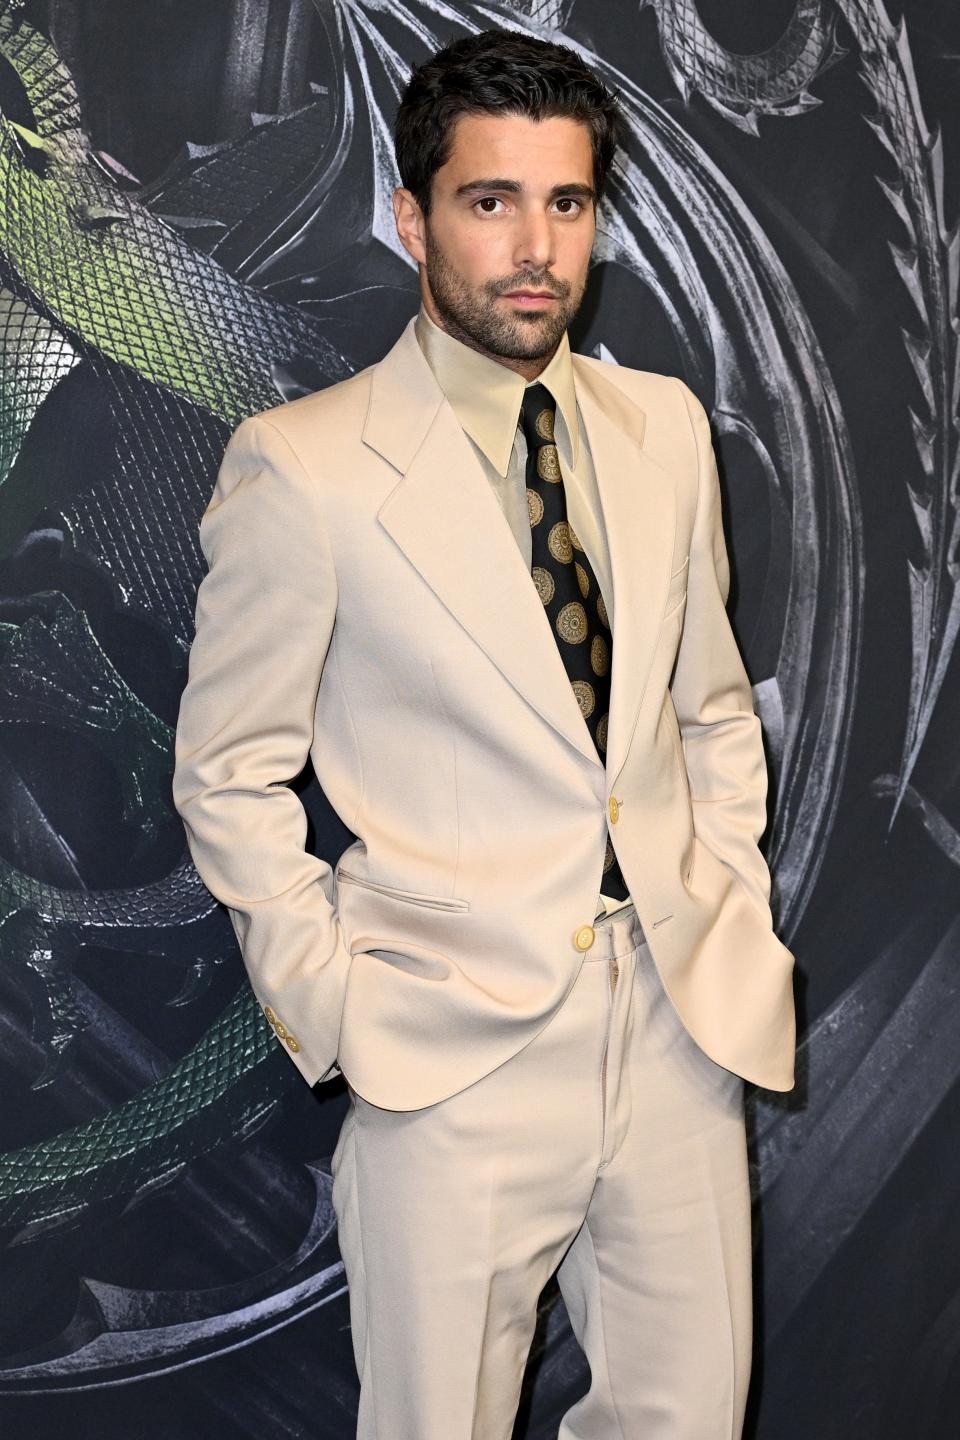 Fabien Frankel in a cream suit with a polka dot tie at the Season 2 premiere of 